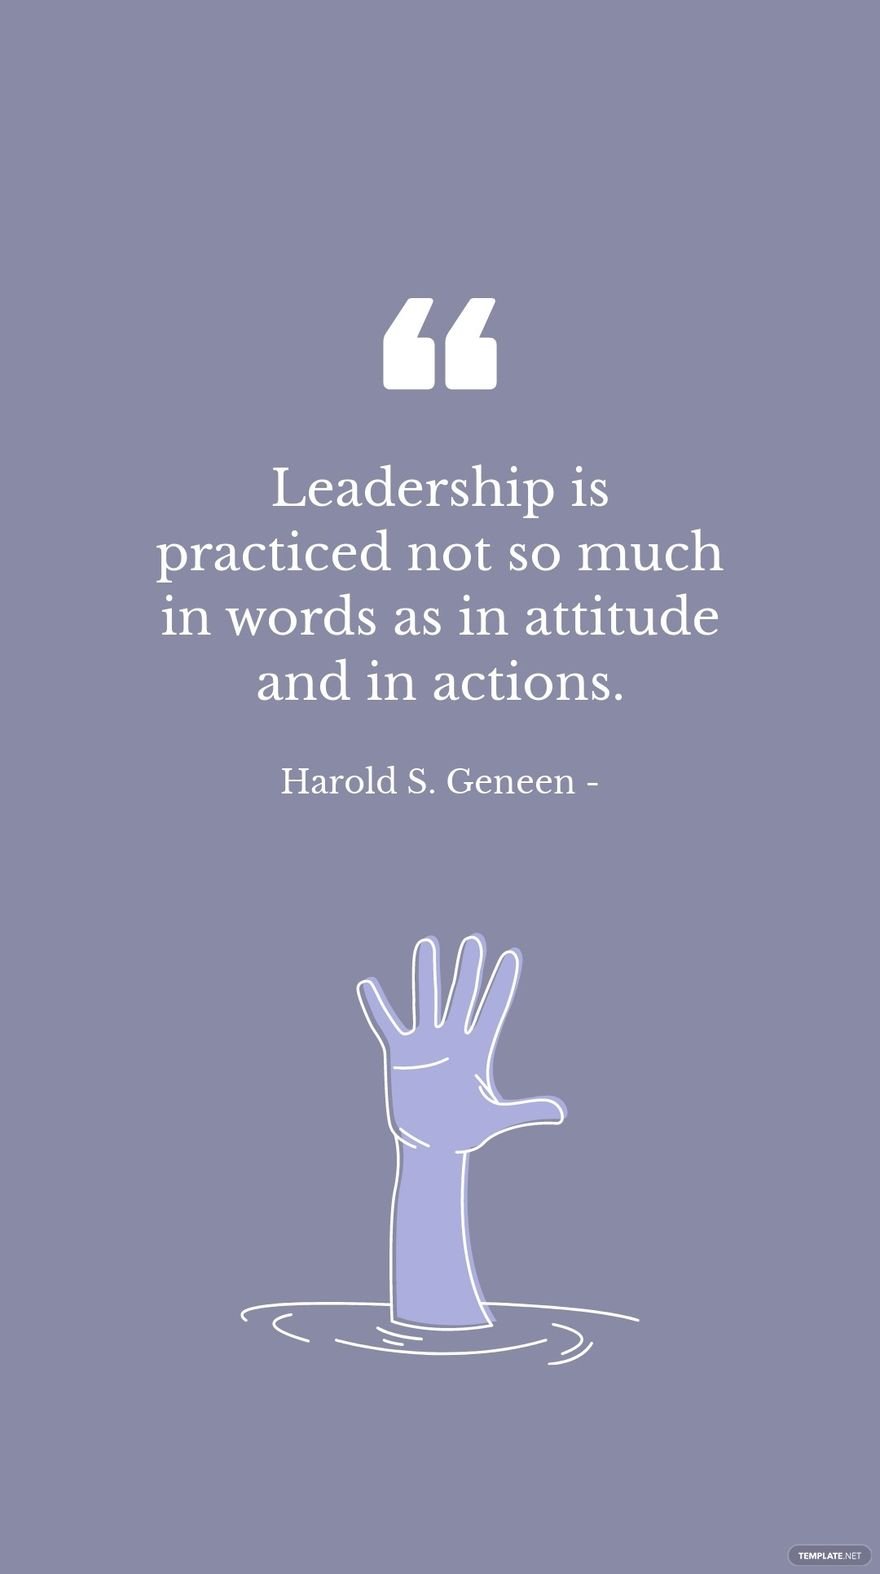 Harold S. Geneen - Leadership is practiced not so much in words as in attitude and in actions. in JPG